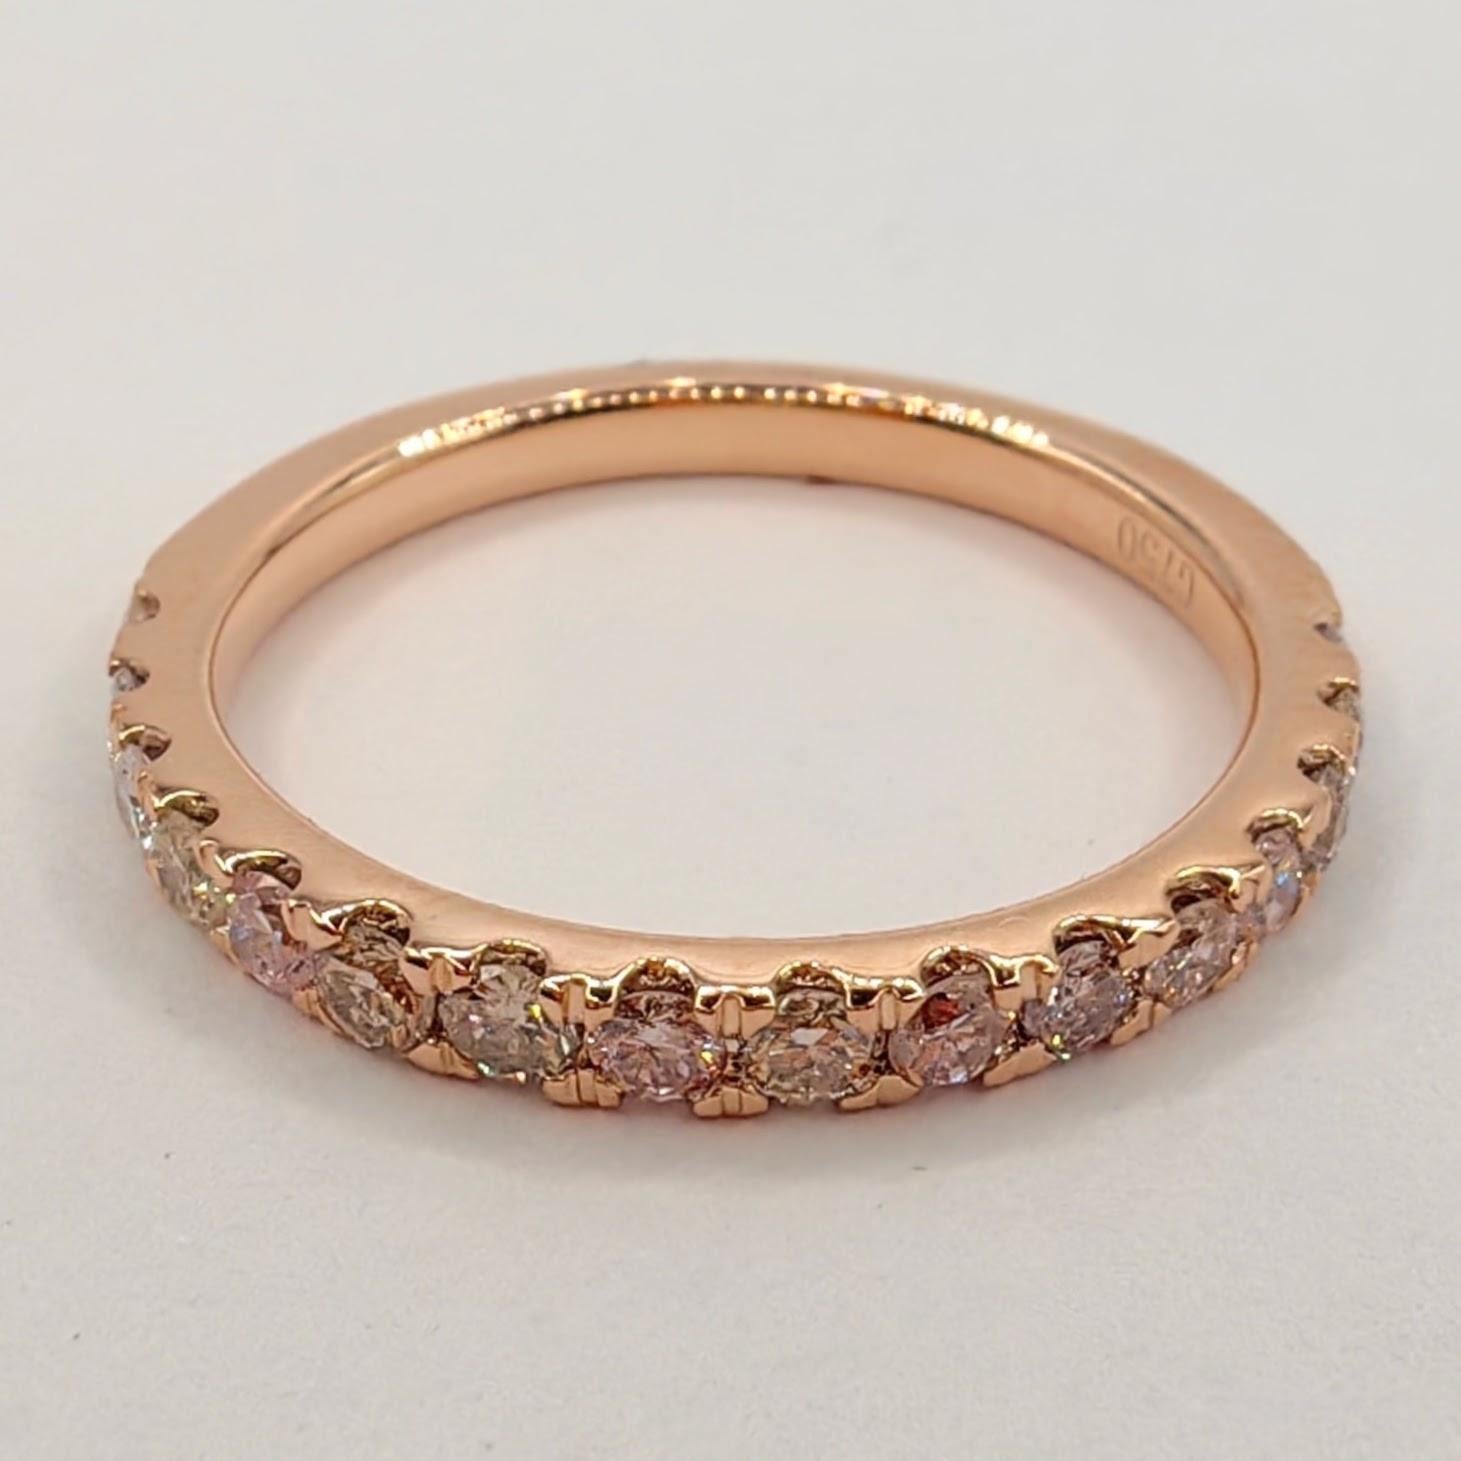 Introducing our exquisite Very Light Pink Natural Diamond Half Eternity Stacking Ring in 18k Rose Gold. This stunning piece combines the allure of delicate pink diamonds with the warm and romantic tones of rose gold, creating a truly captivating